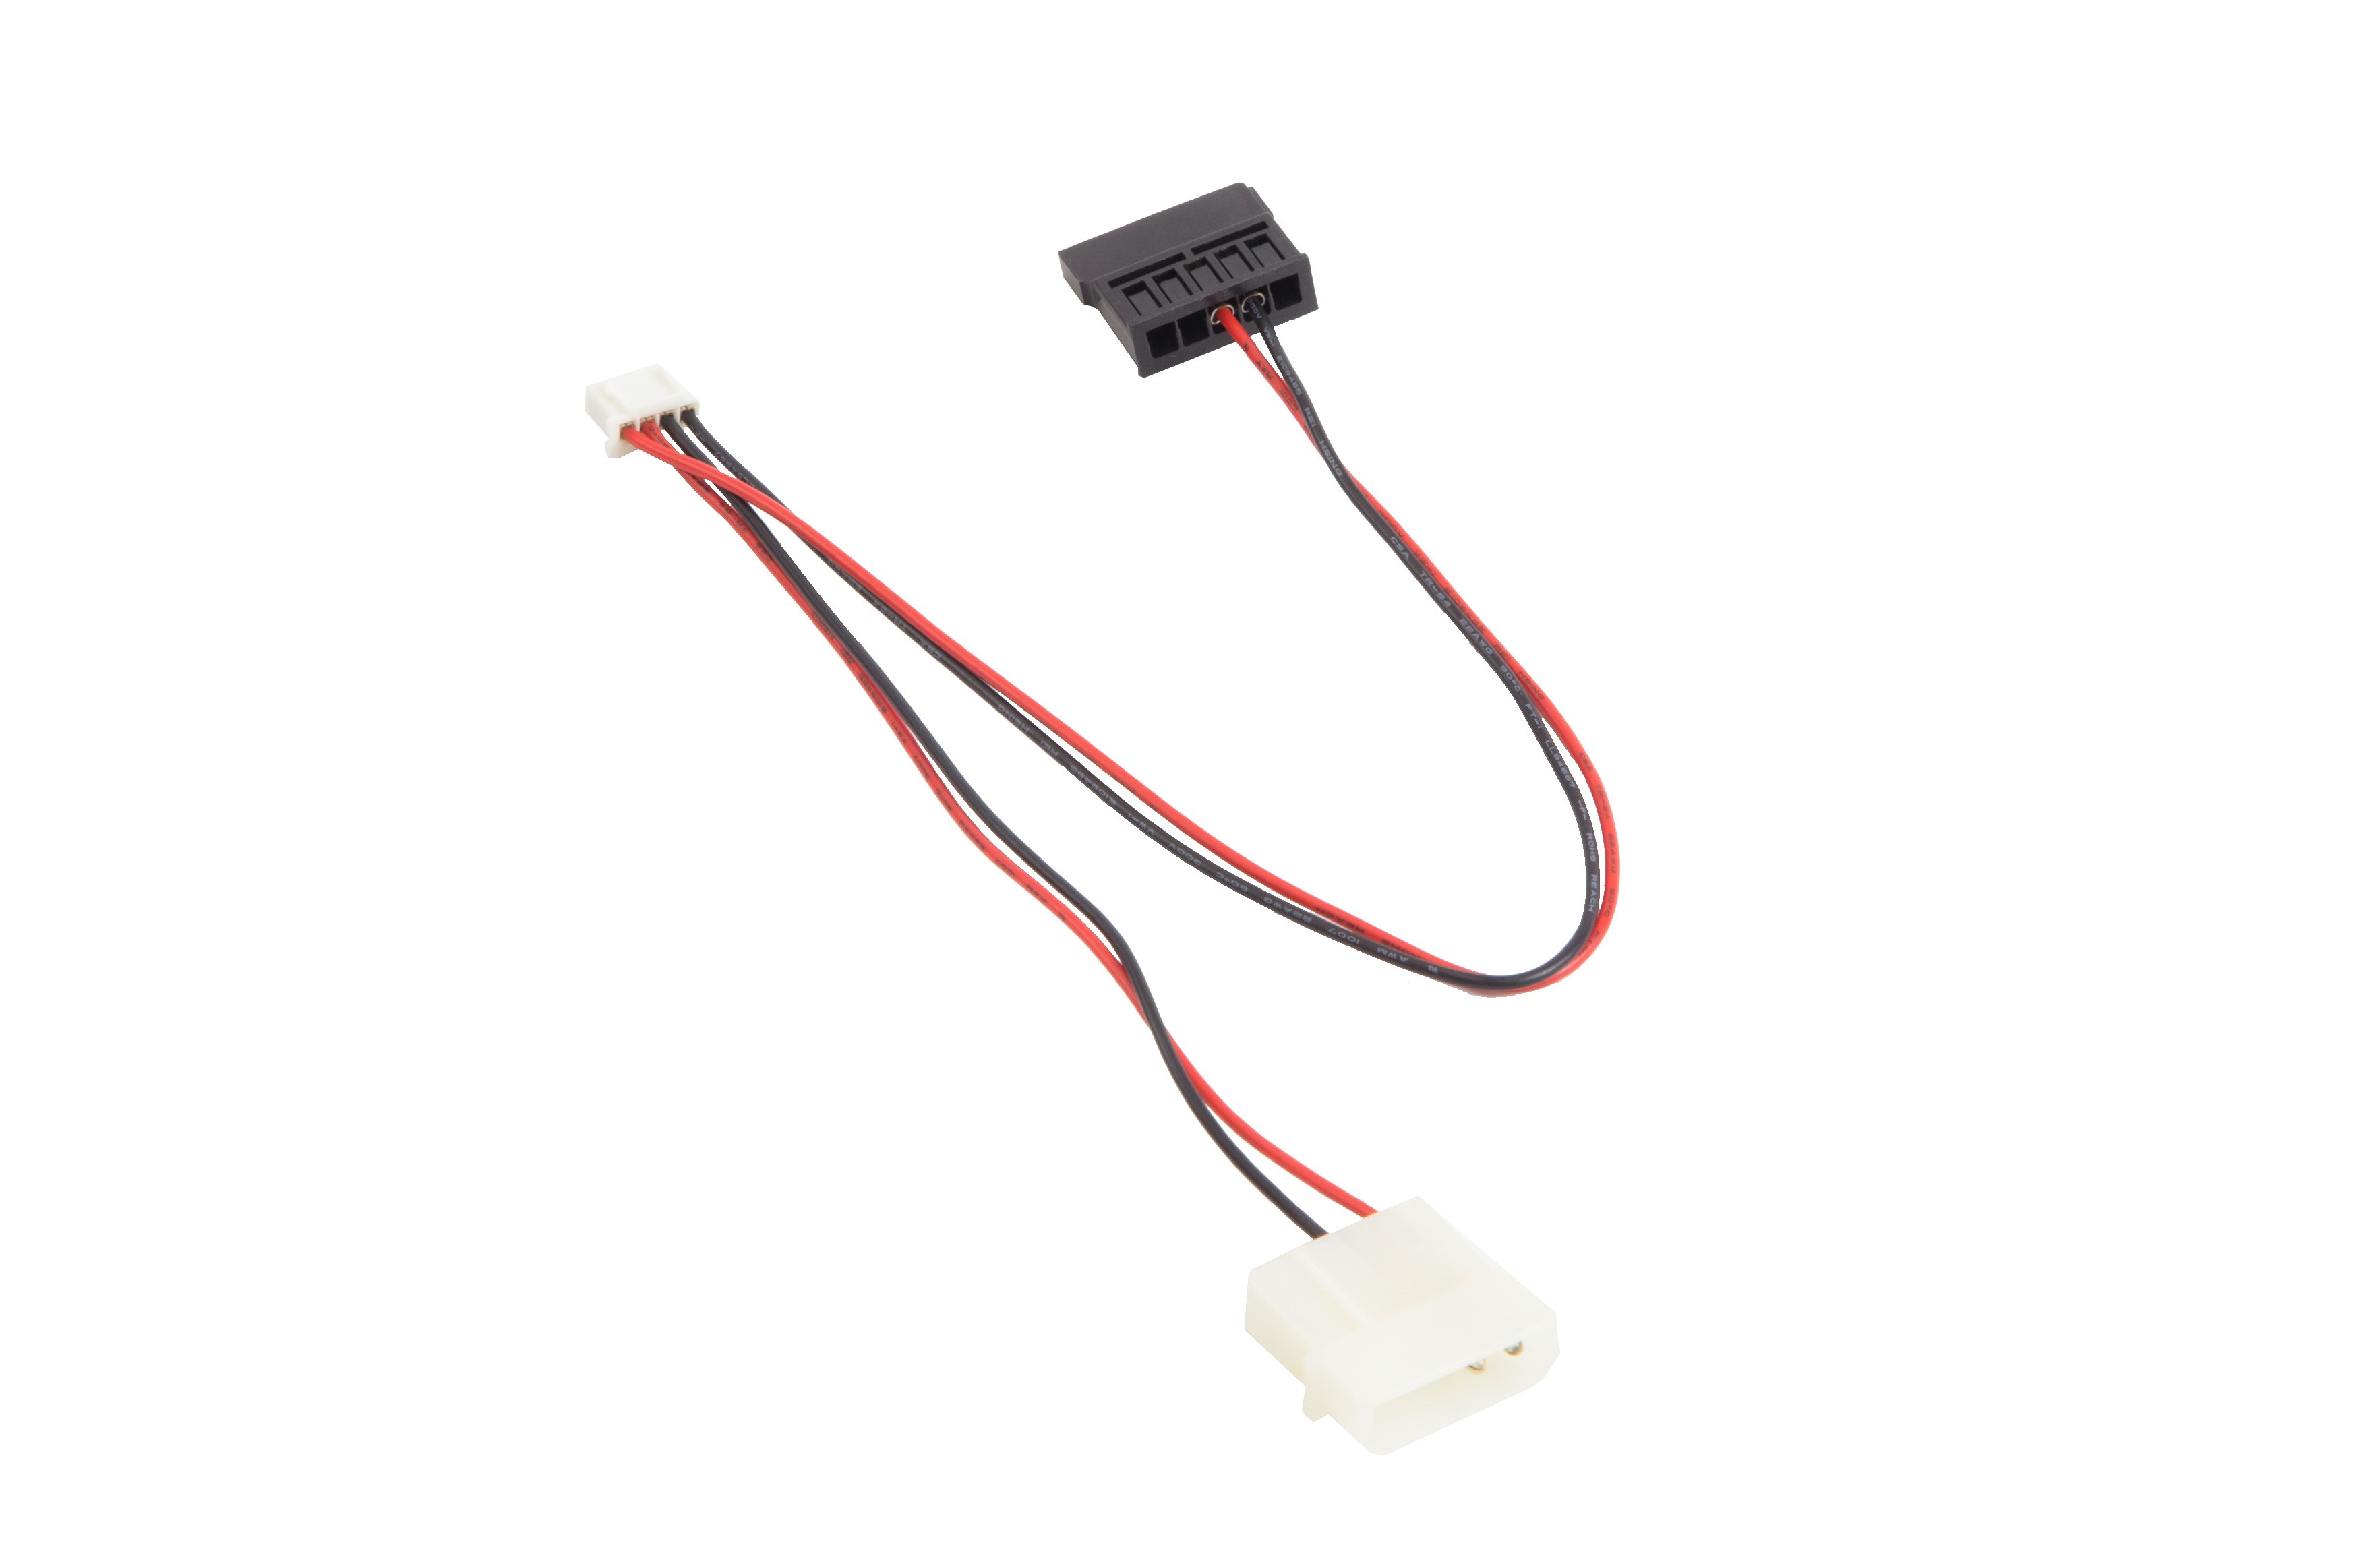 SATA POWER CABLE WITH PITCH 2.5 HOUSING  |Products|Accessories|Cable & Cord